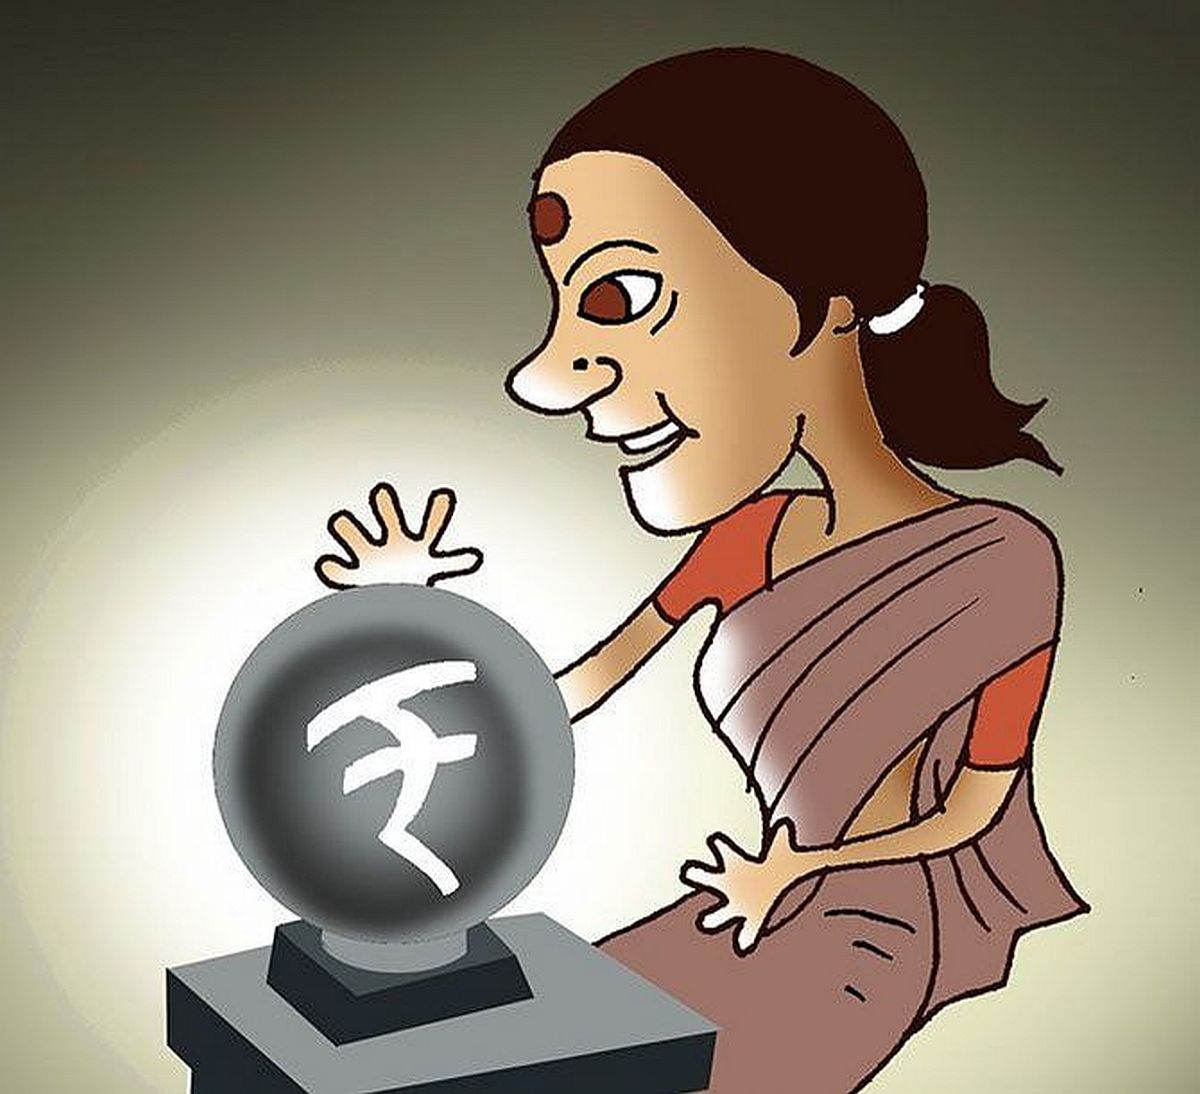 No scrutiny on Rs 2.5 lakh cash deposits by housewives